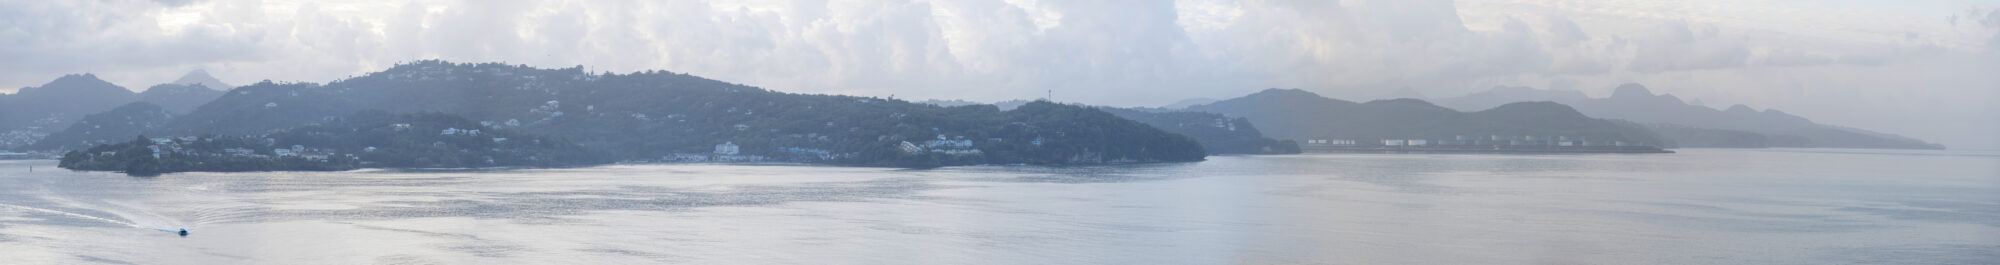 St. Lucia (2)